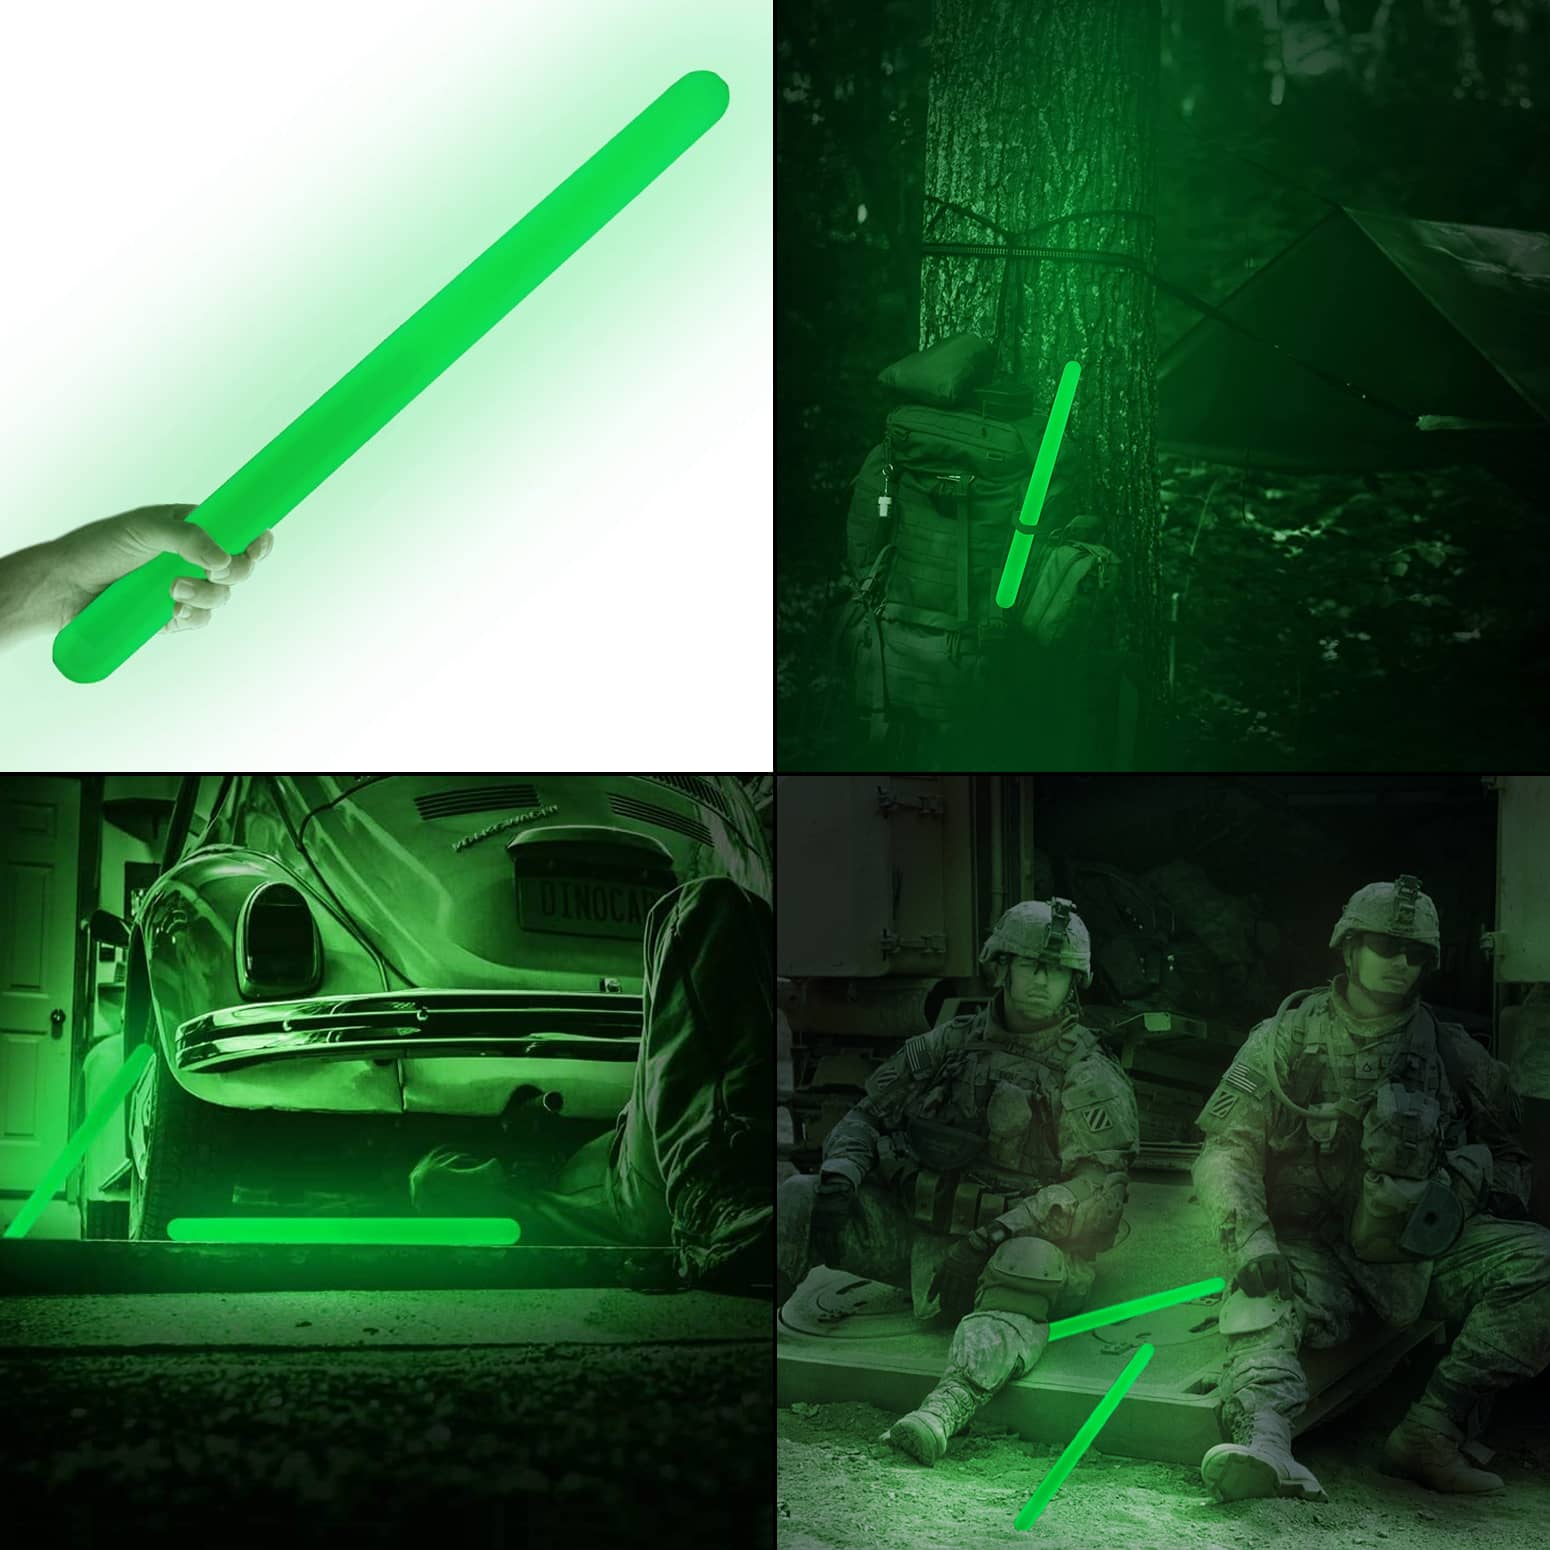 Gigantic Ultra Bright Industrial Grade Glow Stick - 14 Inches Long!